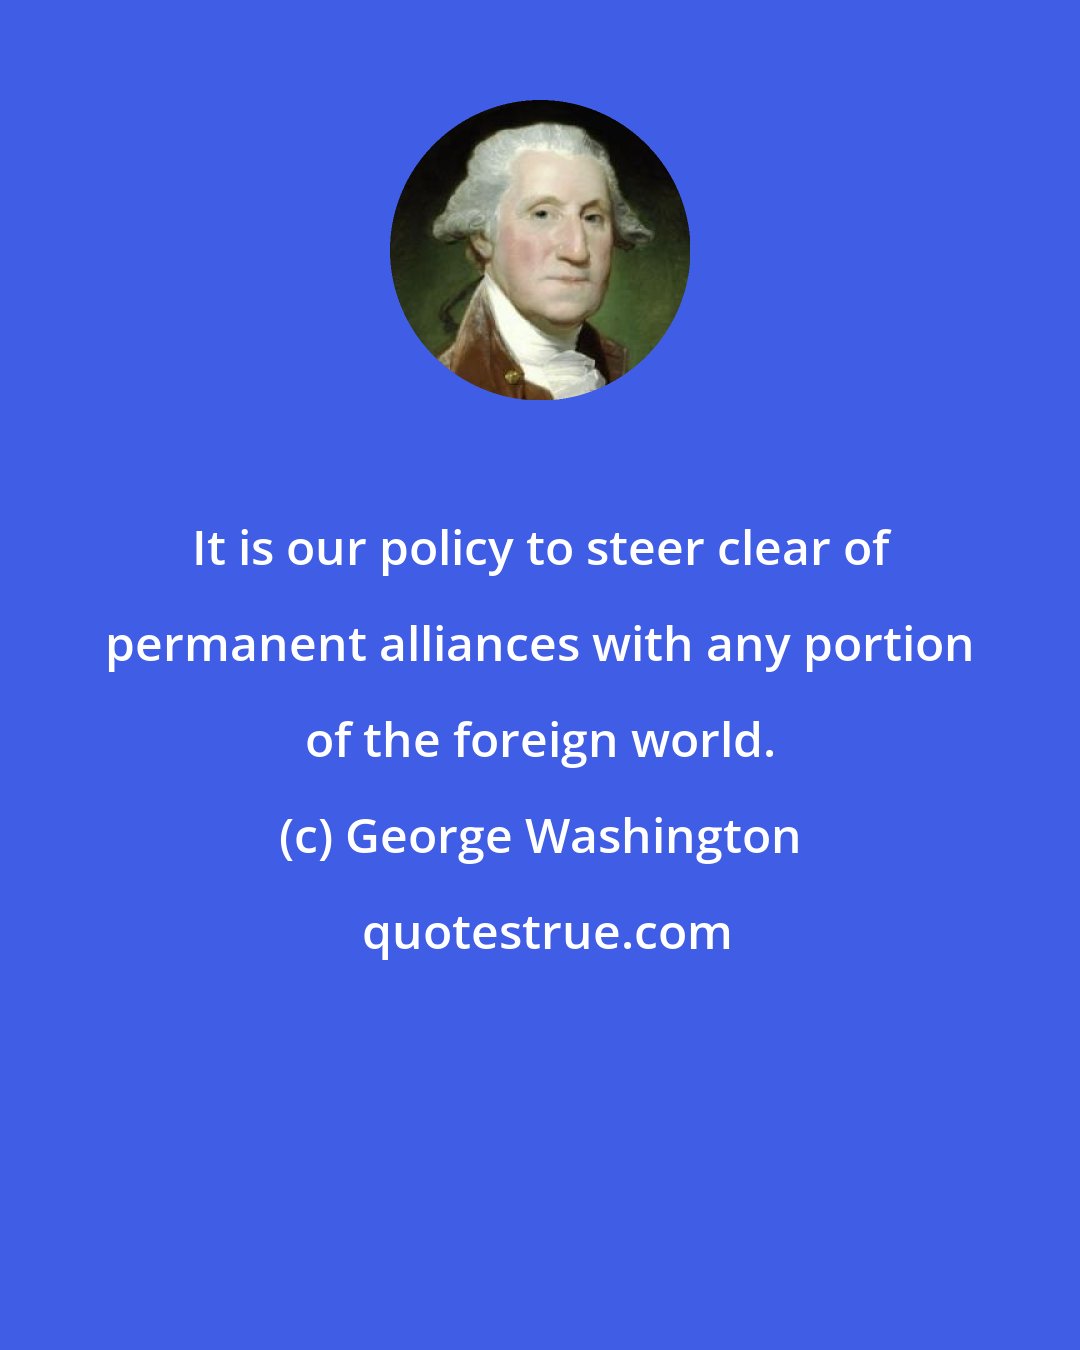 George Washington: It is our policy to steer clear of permanent alliances with any portion of the foreign world.